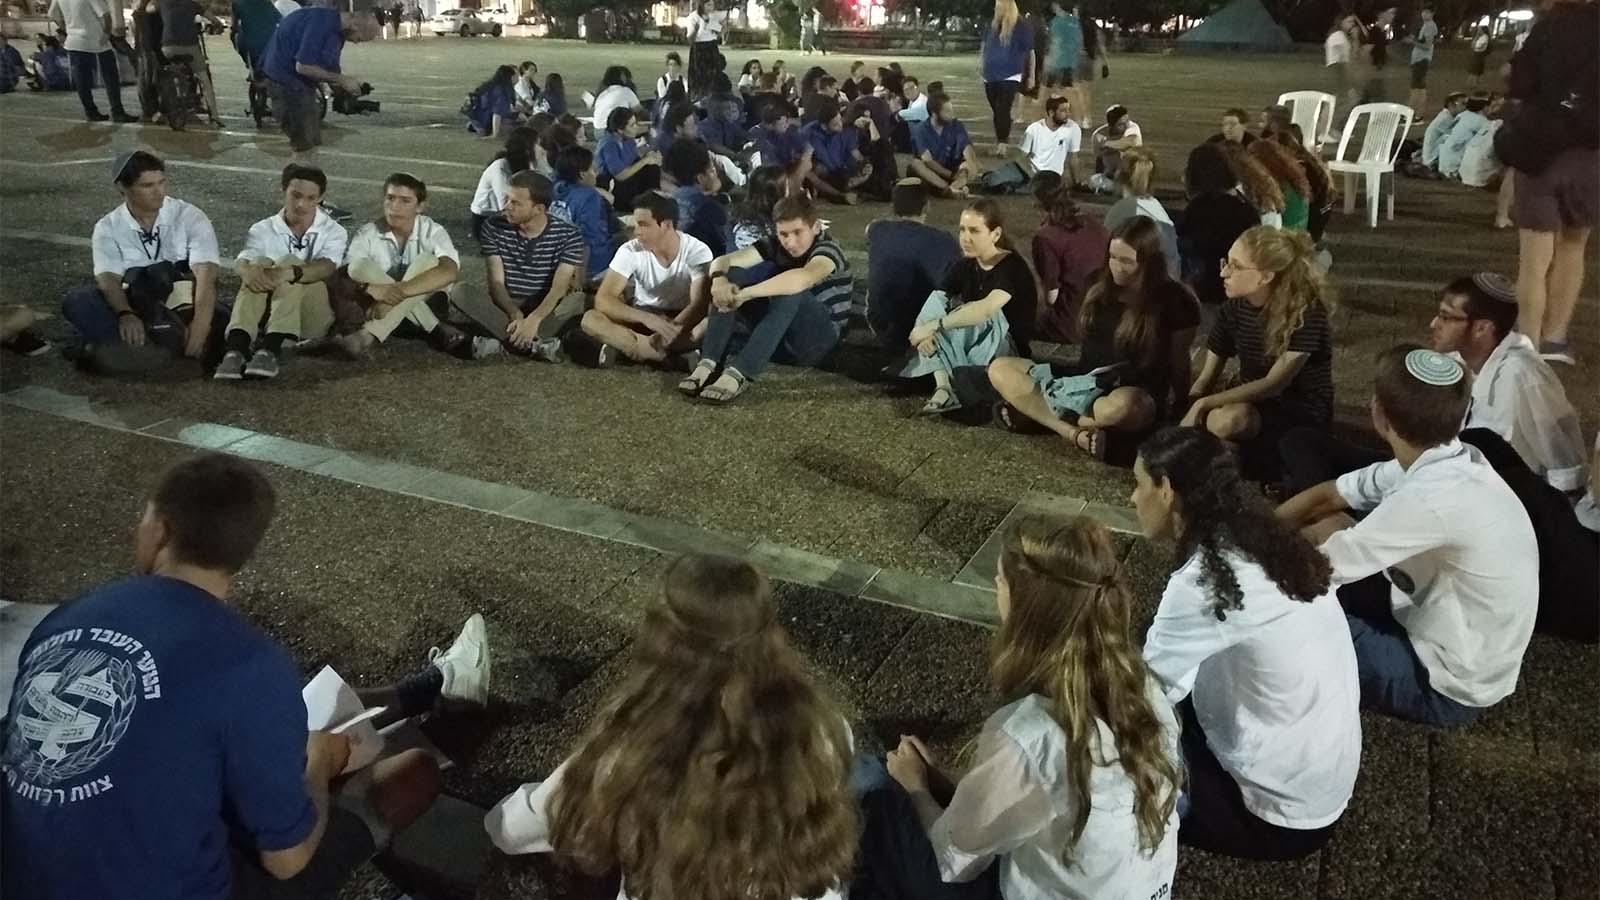 Open discussion circles at the 9th of Av Tent run by NOAL youth movement and Bnei Akiva, August 10, 2019 (Credit: Nizzan Zvi Cohen)